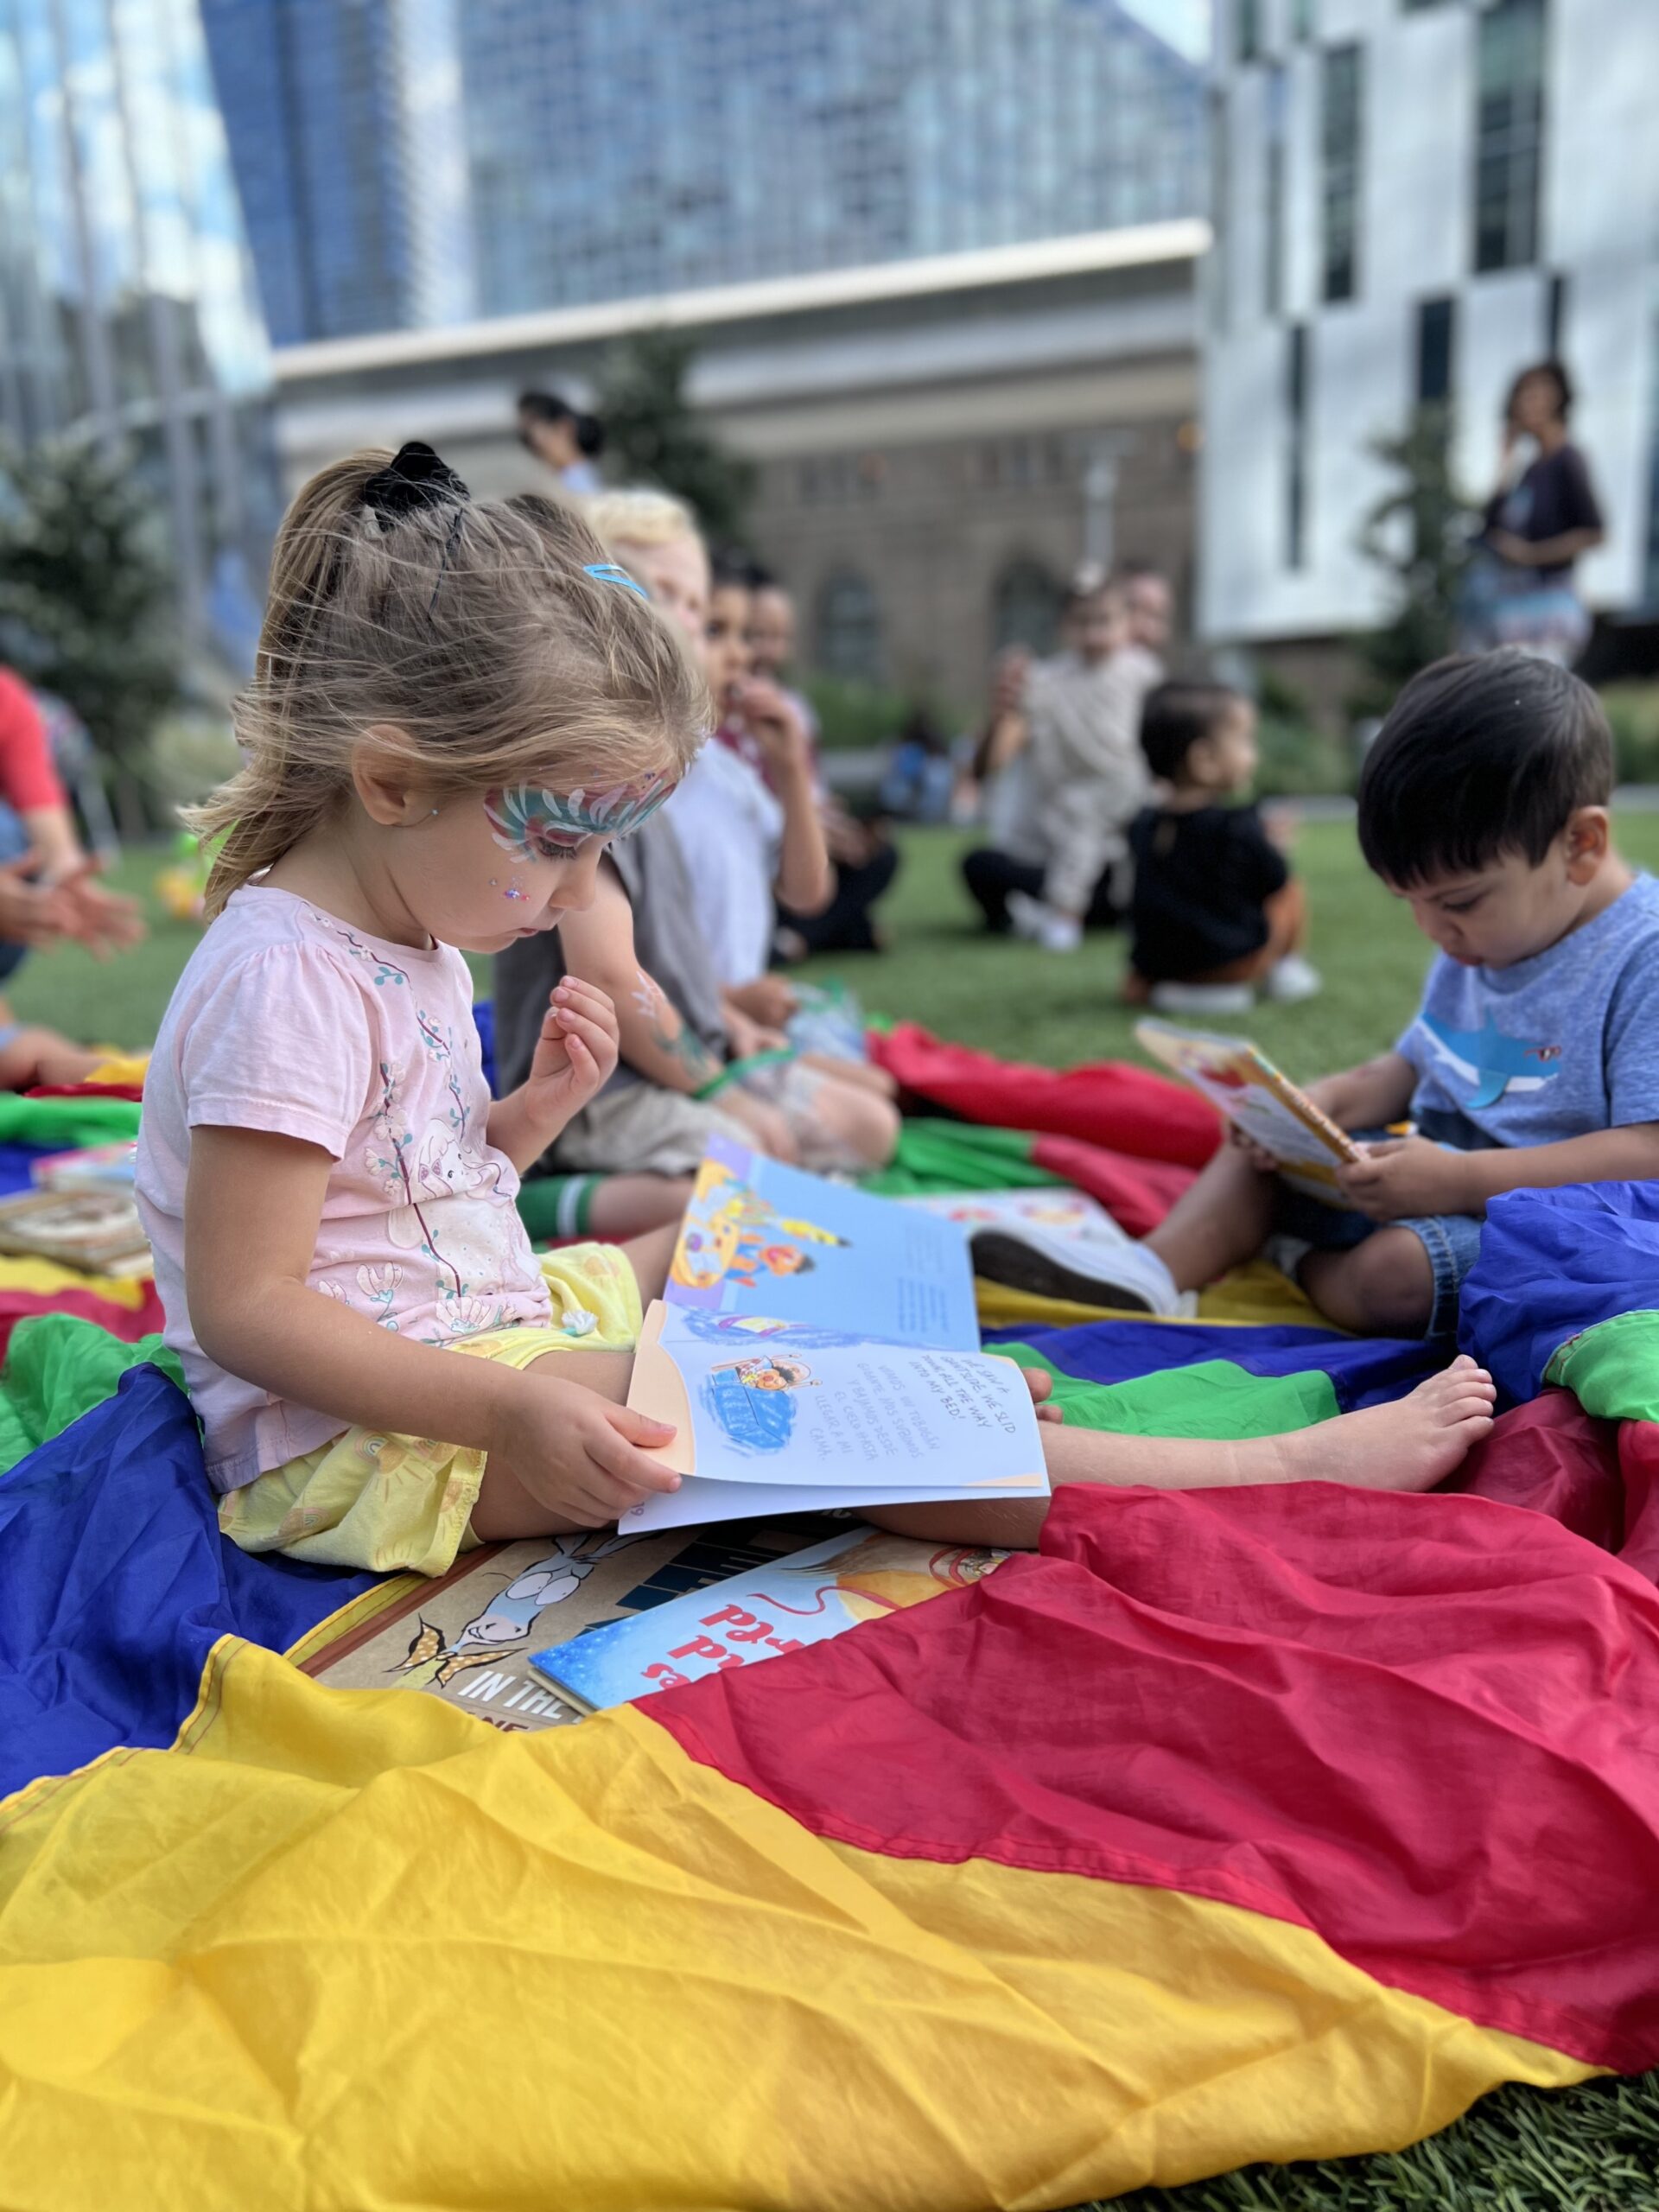 Children reading at a summer event.